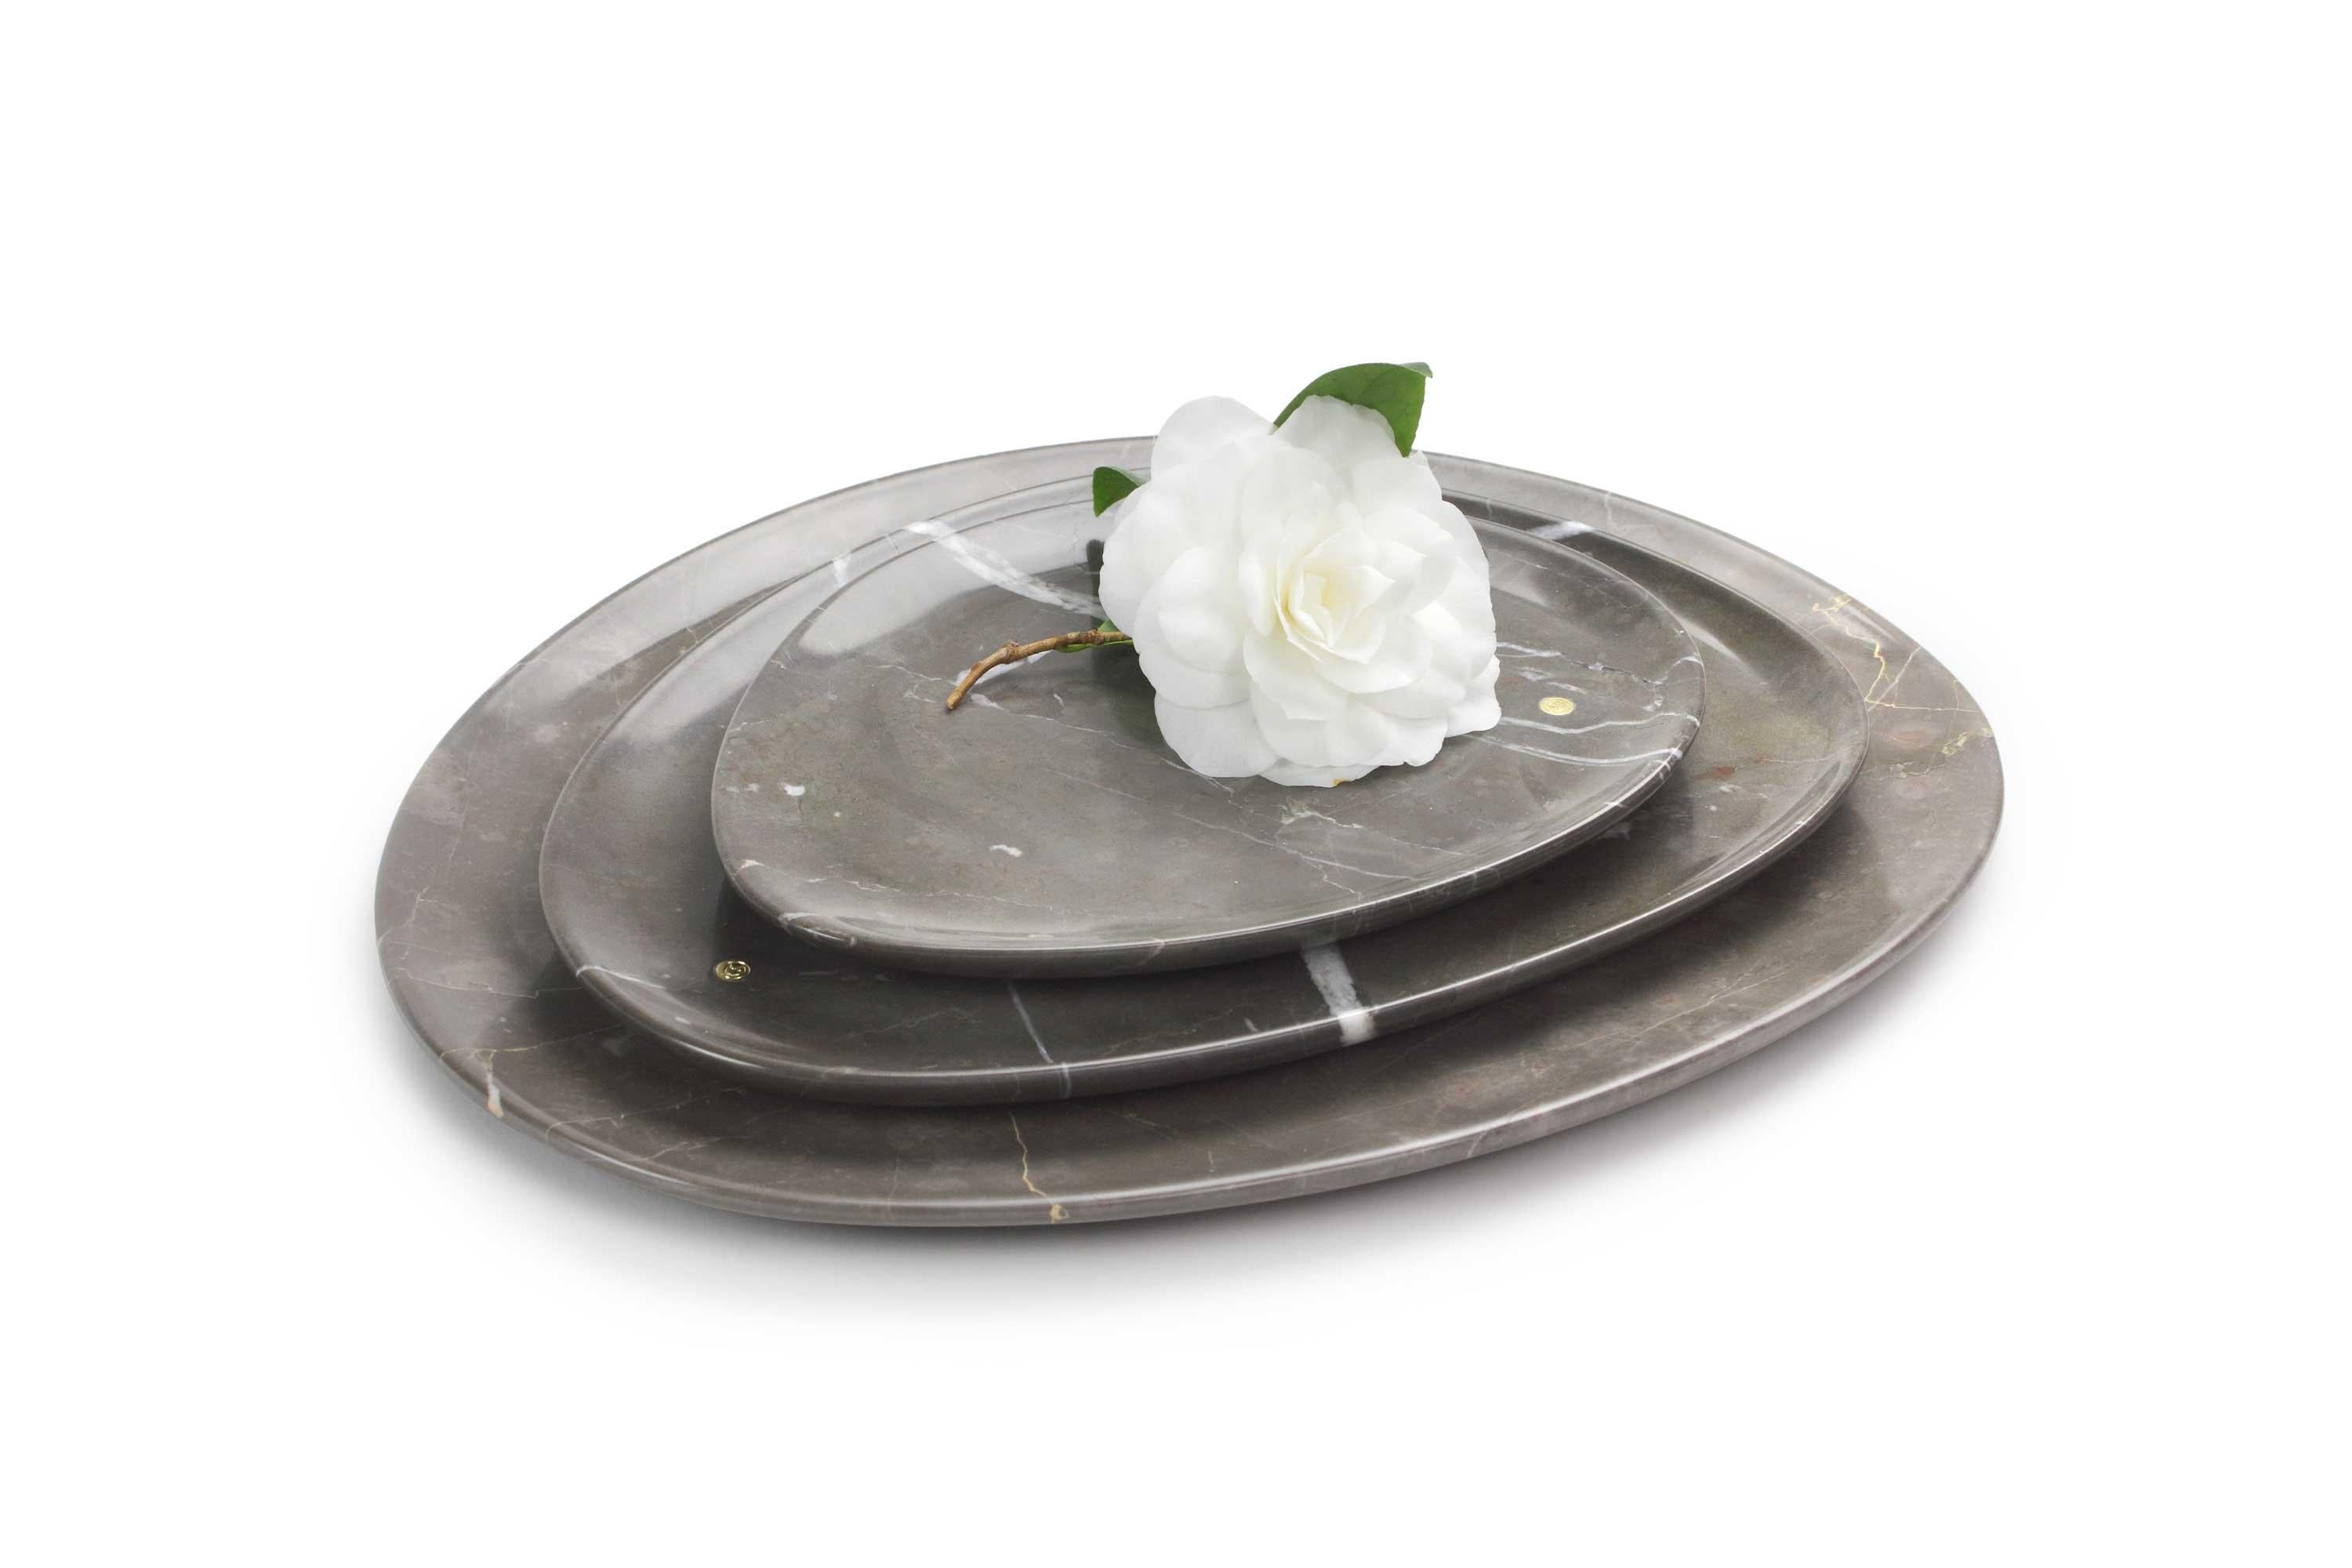 Hand carved presentation plates in Imperial Grey marble.
Multiple use as plates, platters and placers. 

Dimensions: Small - L24 W20 H1.8 cm, Medium - L30 W28 H1.8 cm and Big - L36 W35 H1.8 cm.
Available in different marbles, onyx and quartzite.